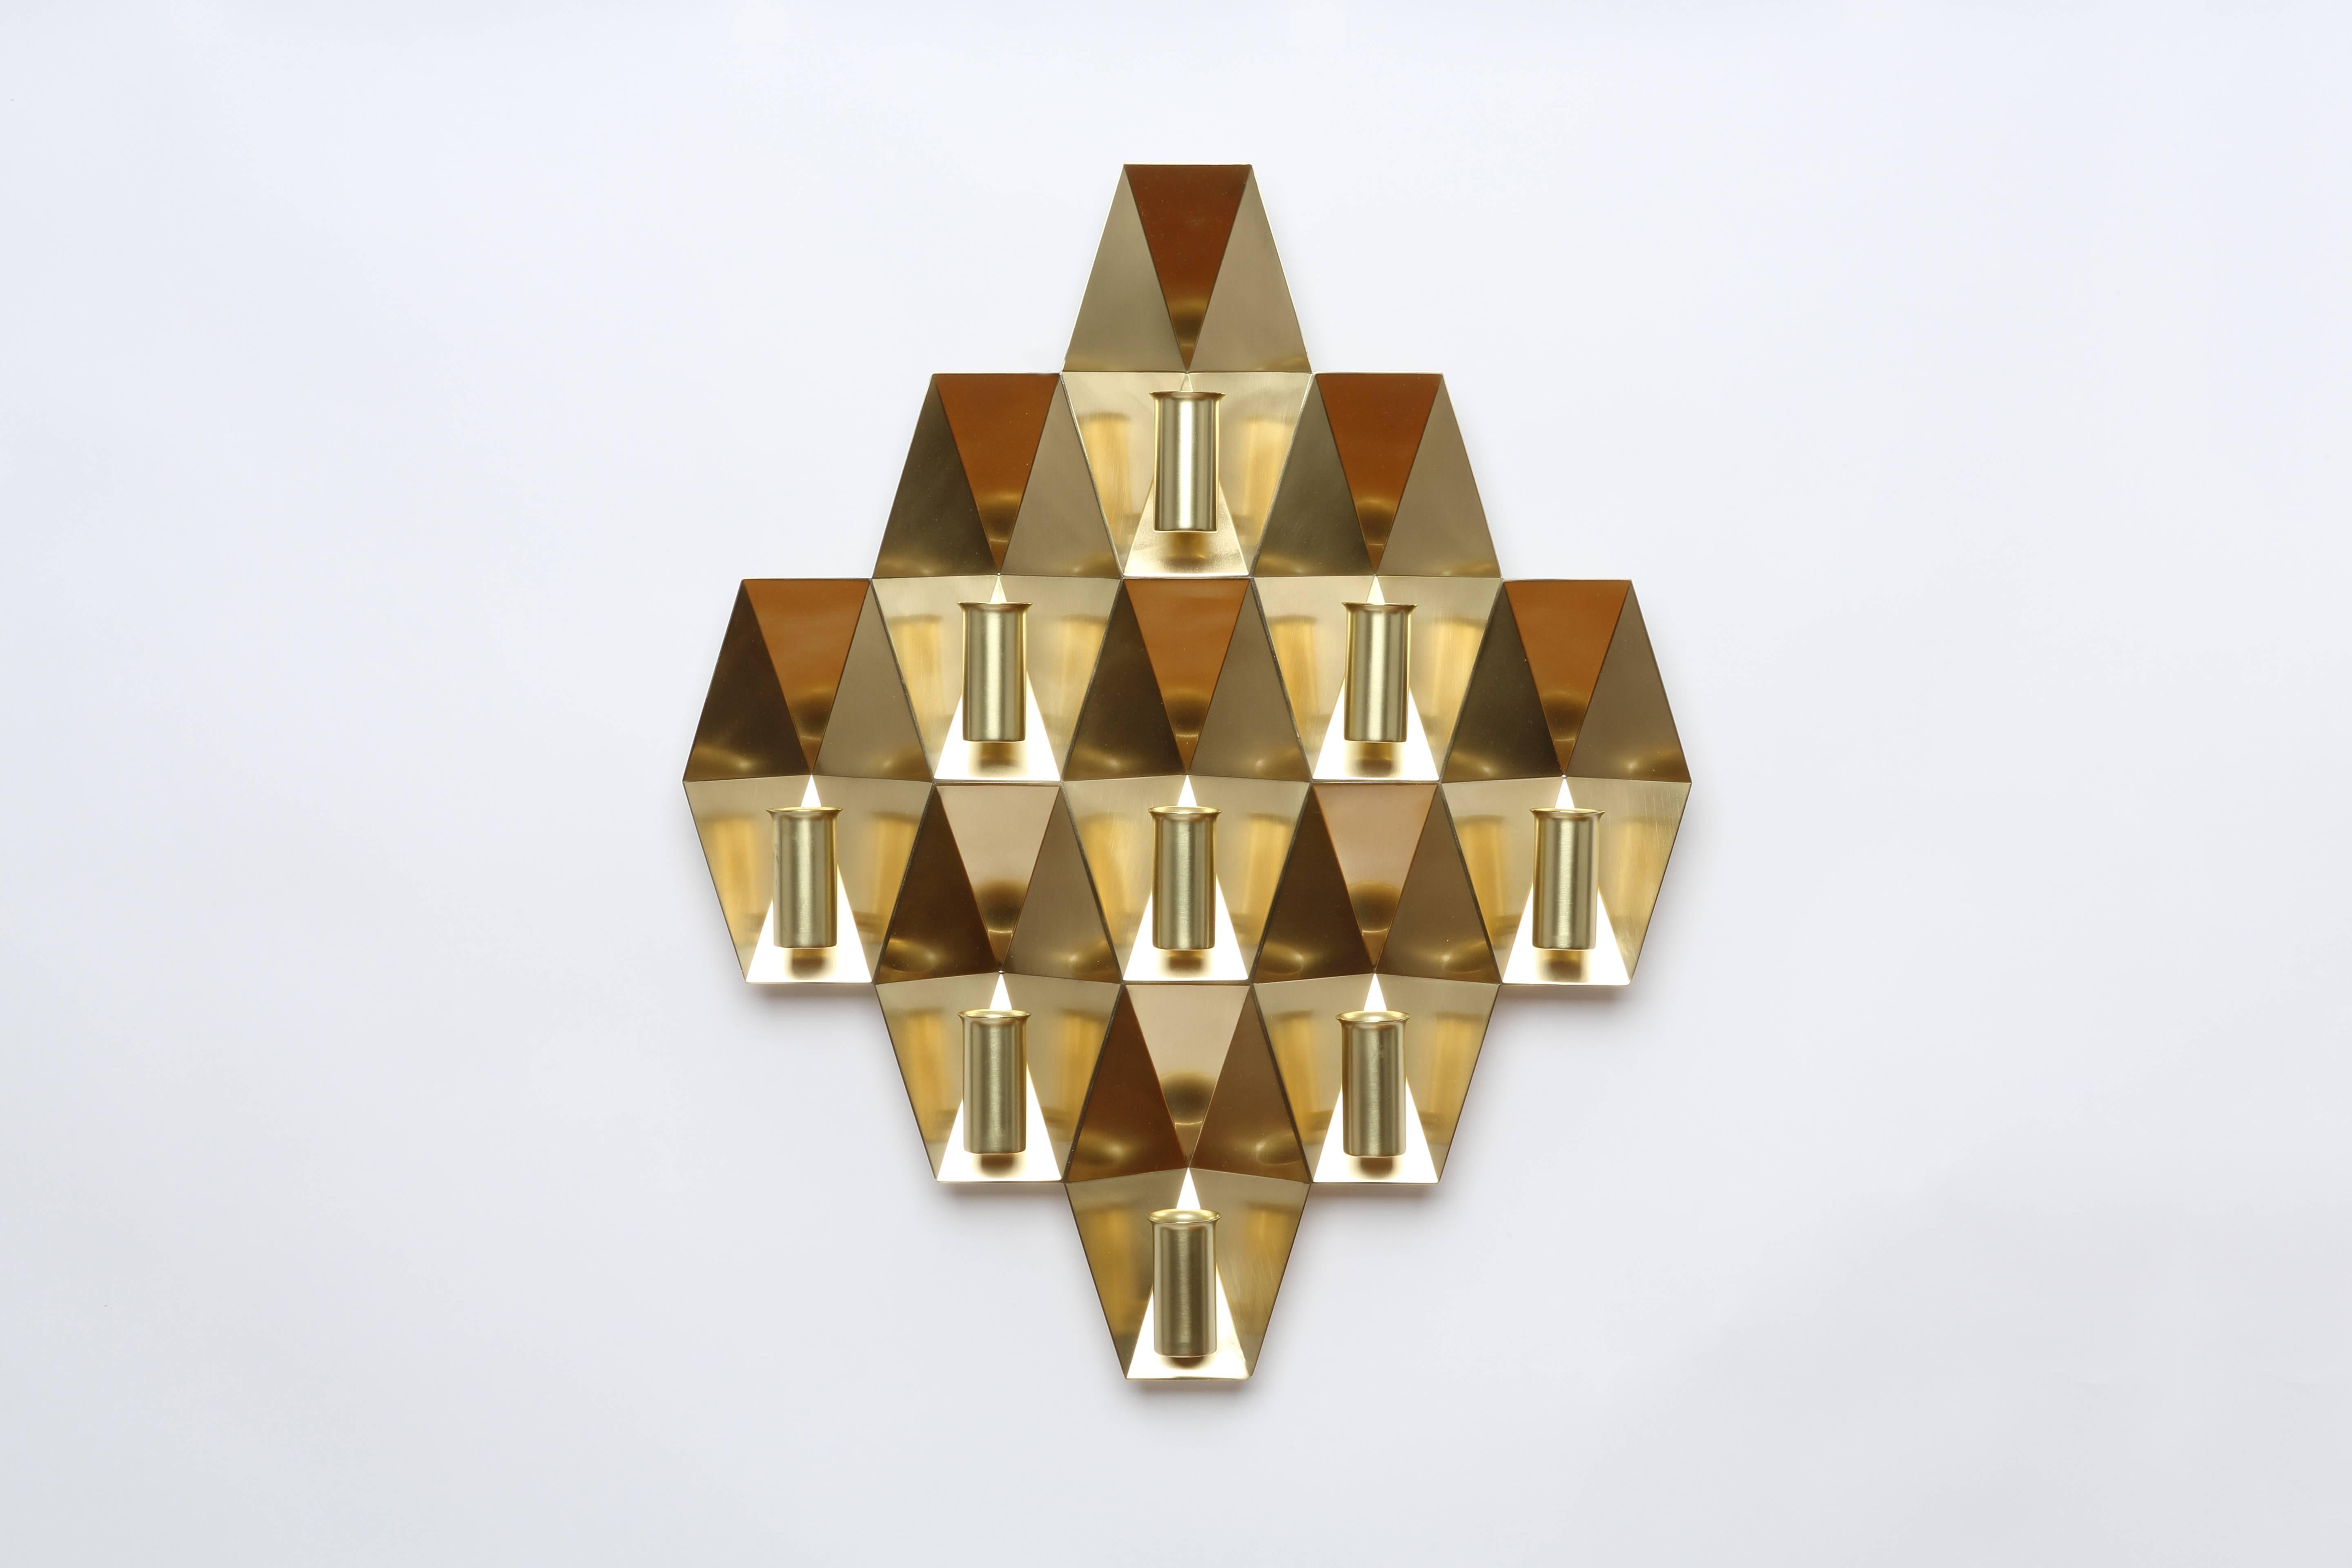 Wall lamps by Fog & Morup, pair
Each lamp has nine lights.
Made in Denmark. Brass.